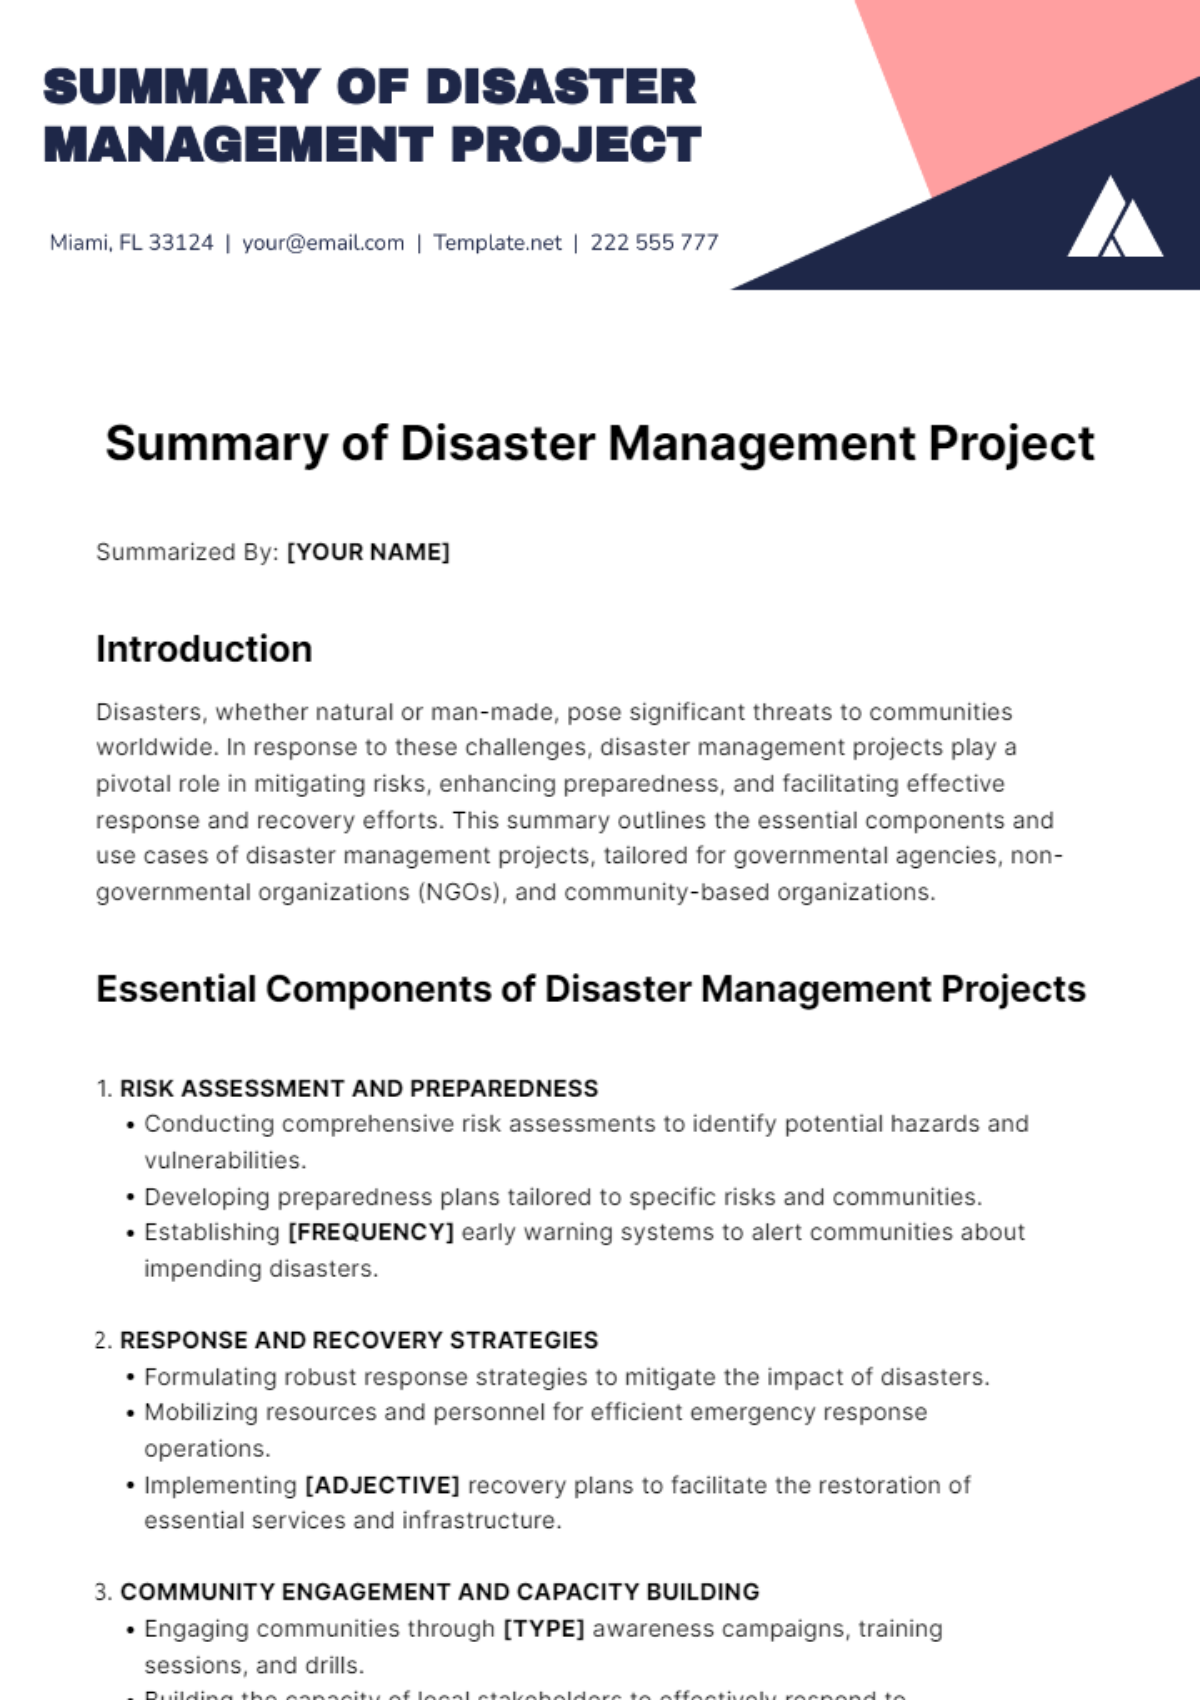 Summary of Disaster Management Project Template